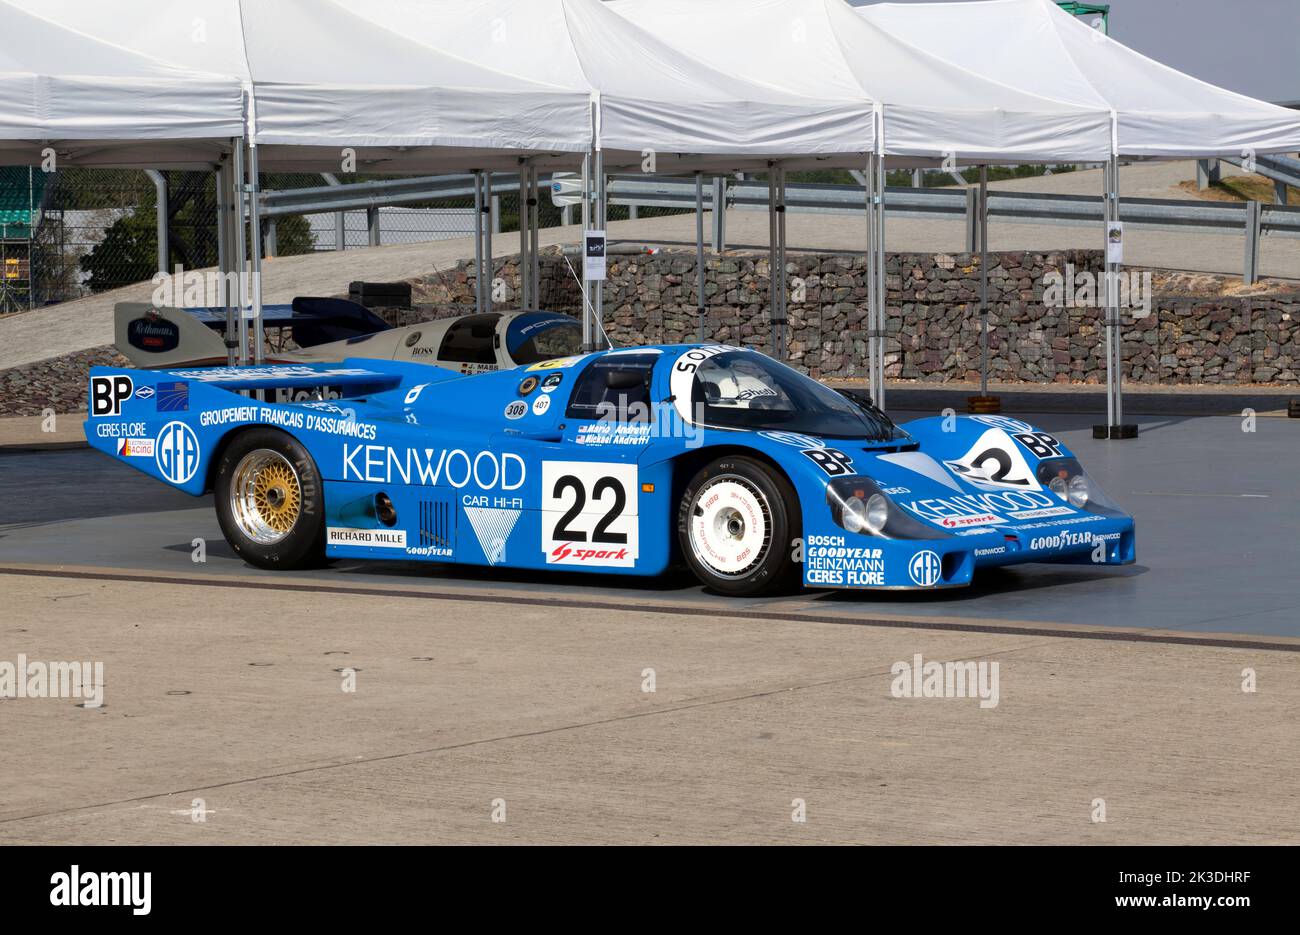 A 1983, Porsche 956 in Kenwood Livery, in a special display Celebrating 40 years of Group C, at the Silverstone Classic 2022 Stock Photo